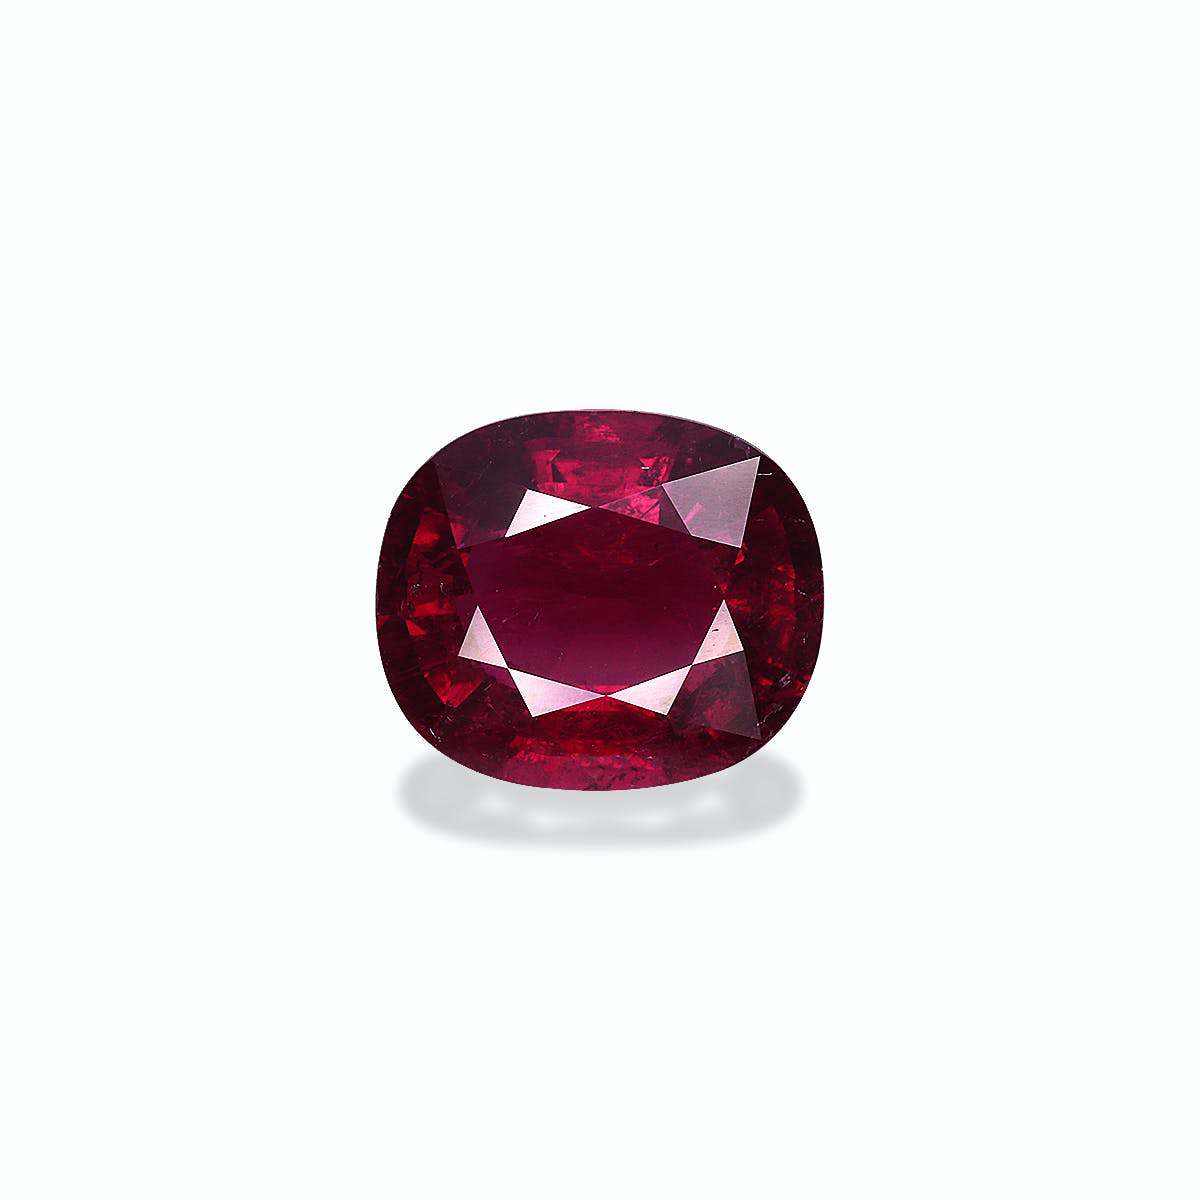 Picture of Red Rubellite Tourmaline 6.88ct - 13x11mm (RL0721)